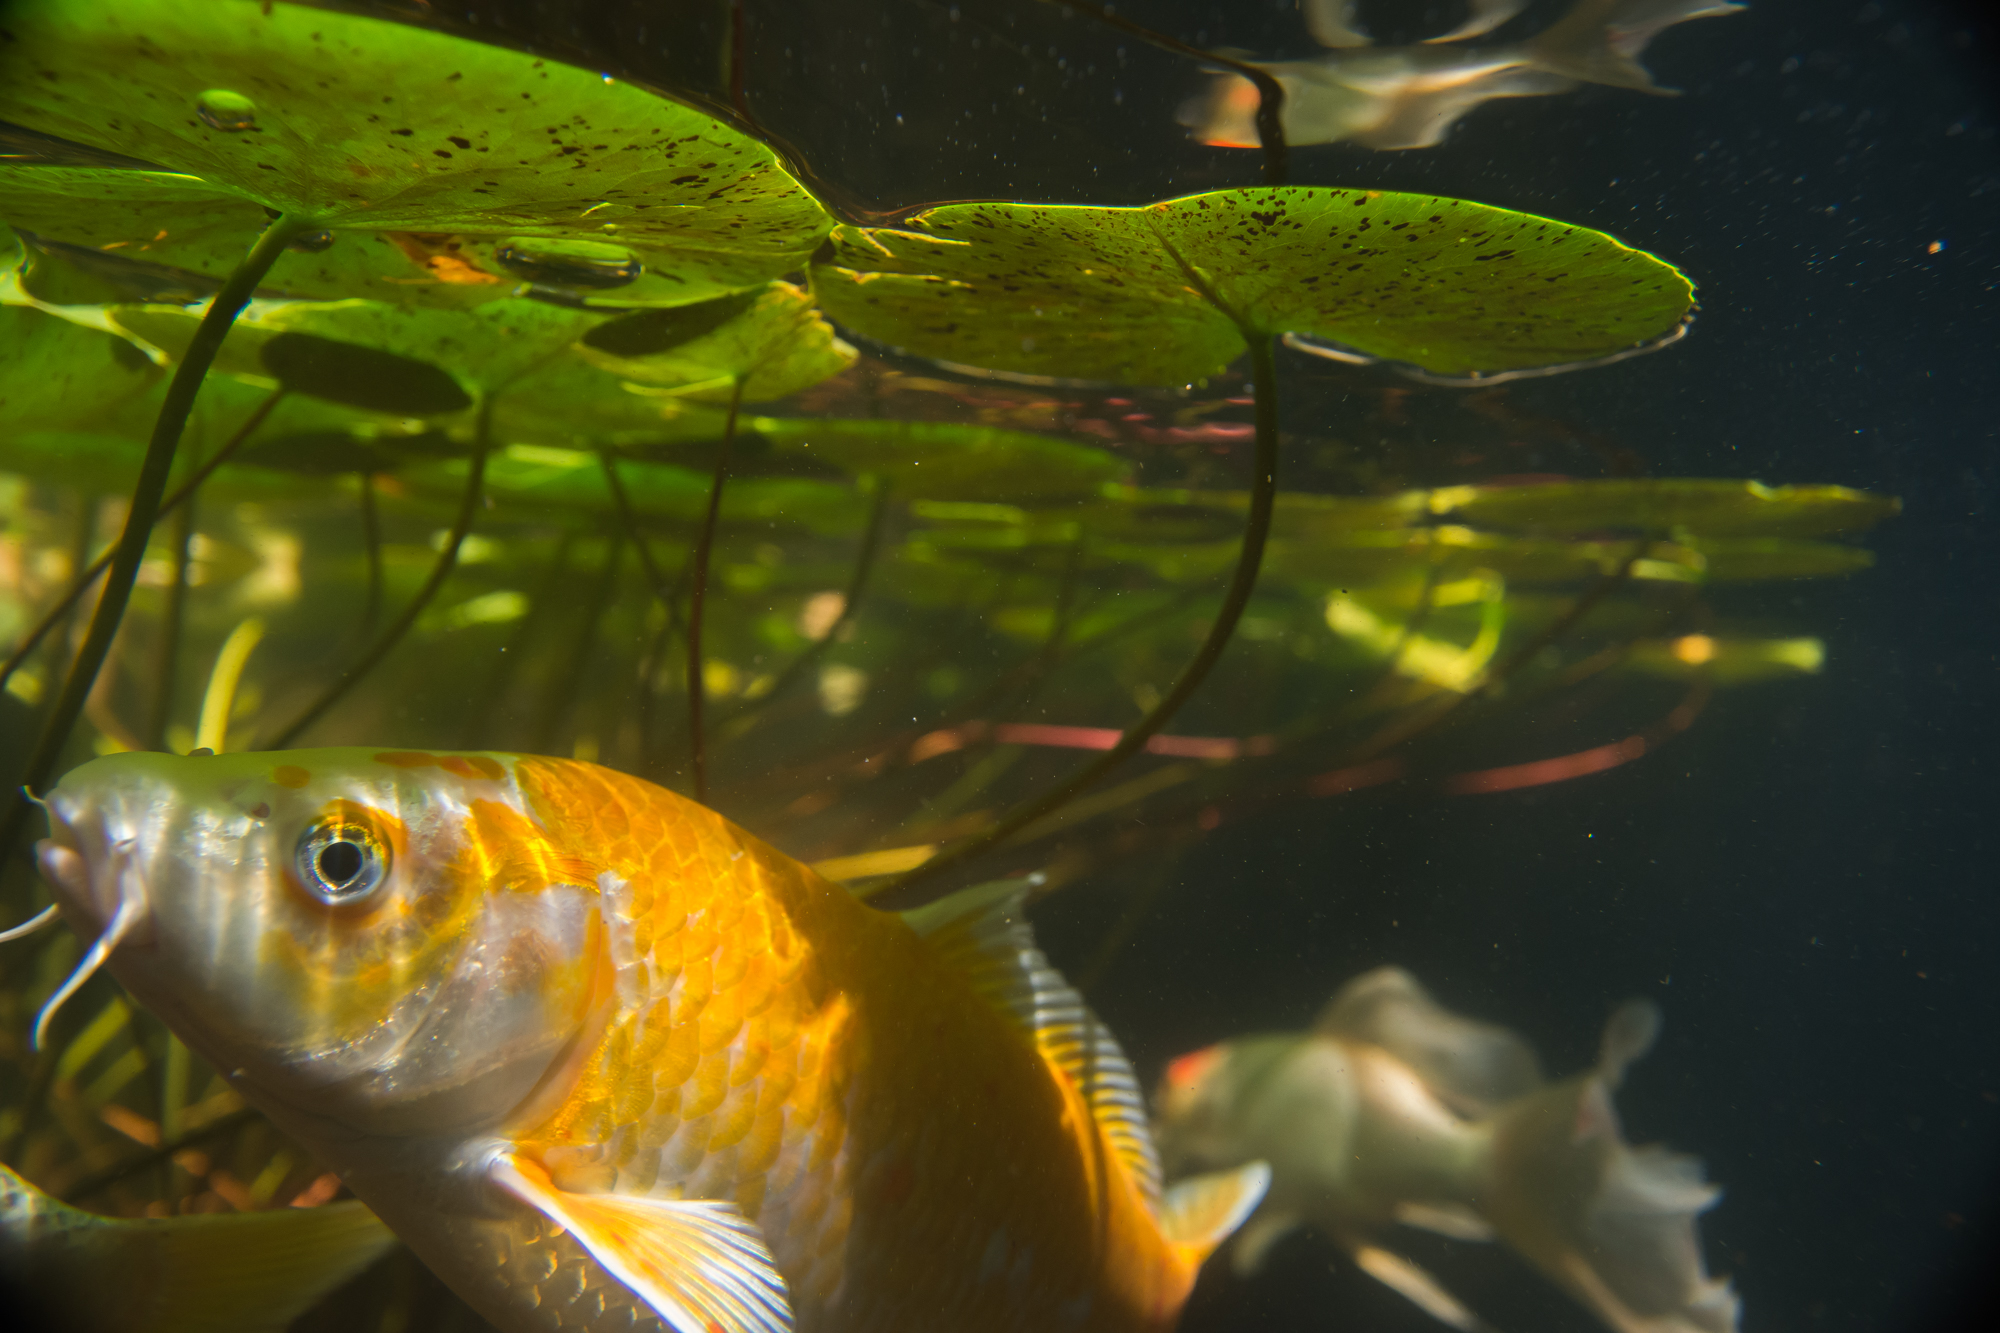 Photograph Like A Pro With Wholesale underwater pond camera